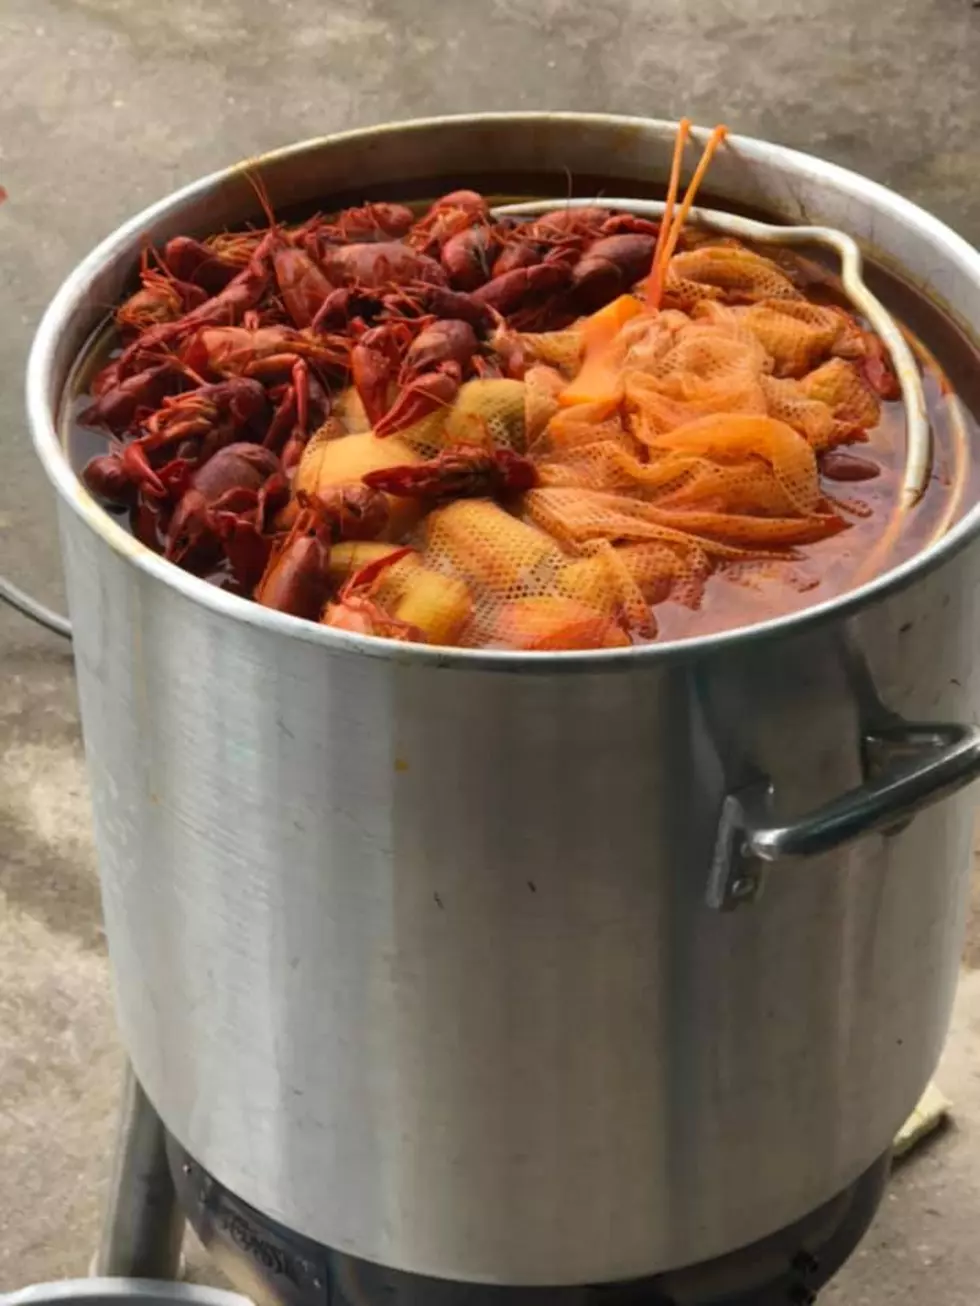 McVey's Seafood 2nd Annual Crawfish Boil-Off Set For May